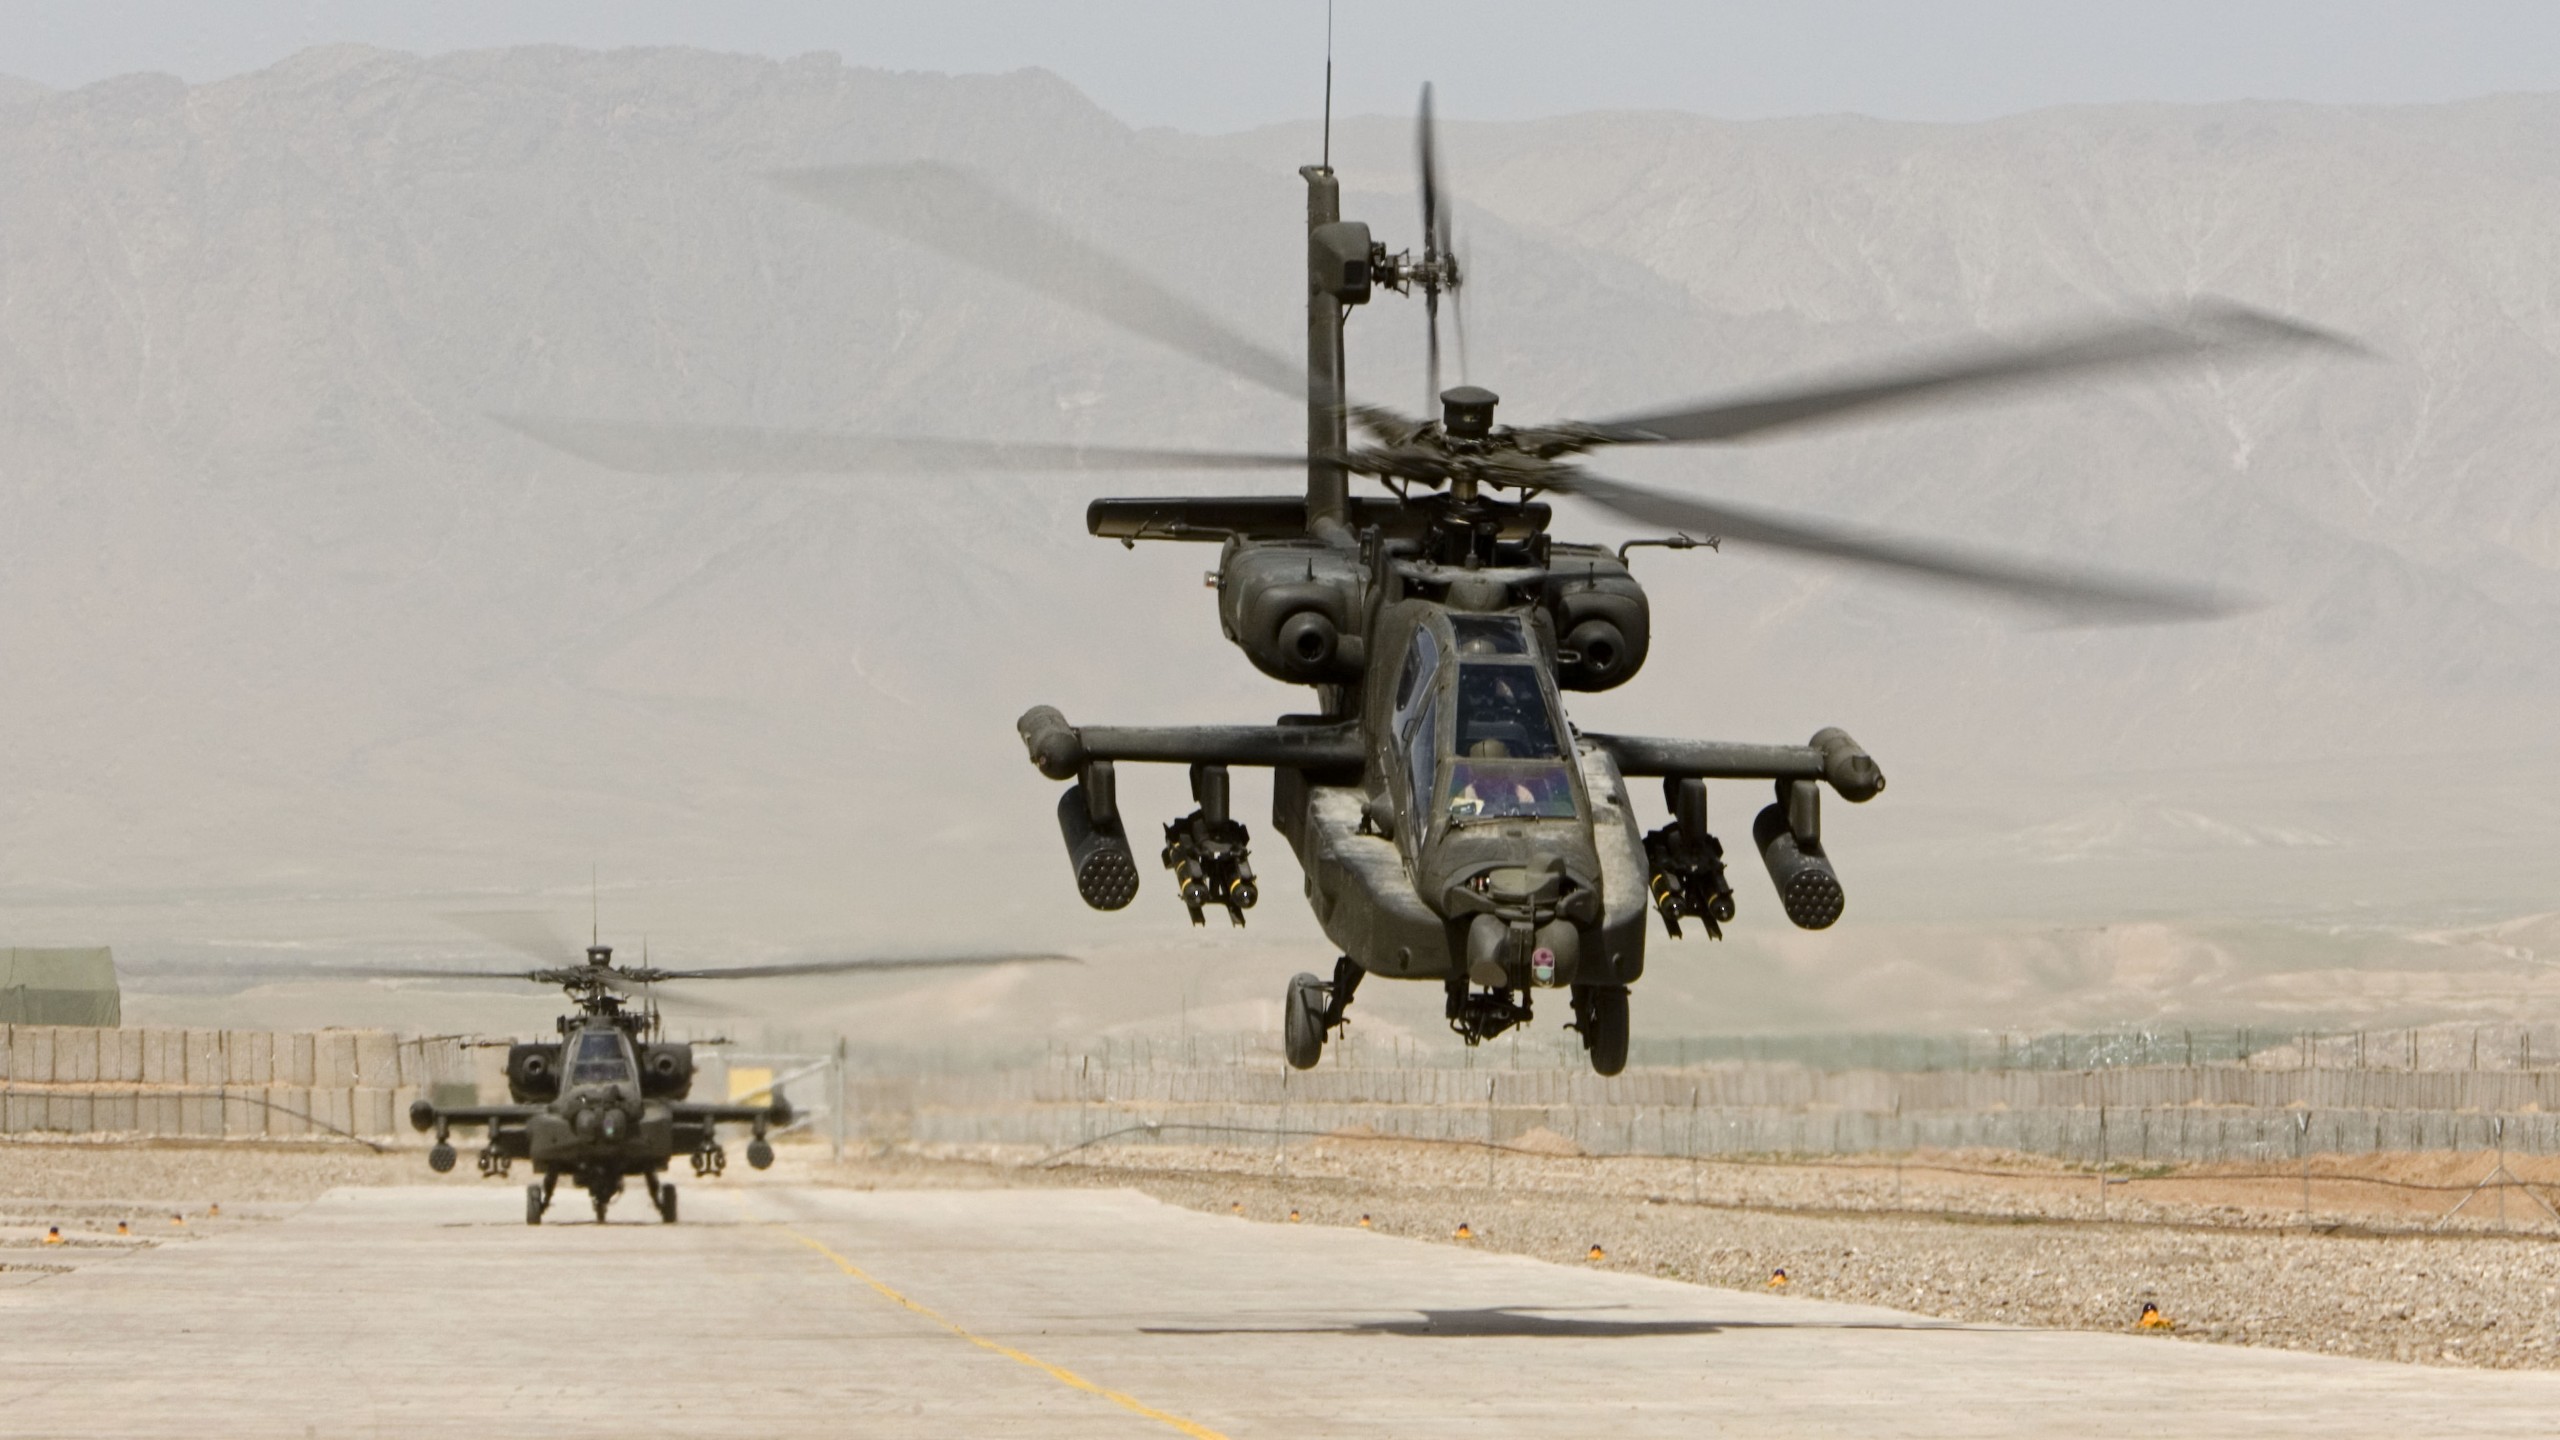 Wallpaper AH- Apache, attack helicopter, US Army, U.S. Air Force, Military